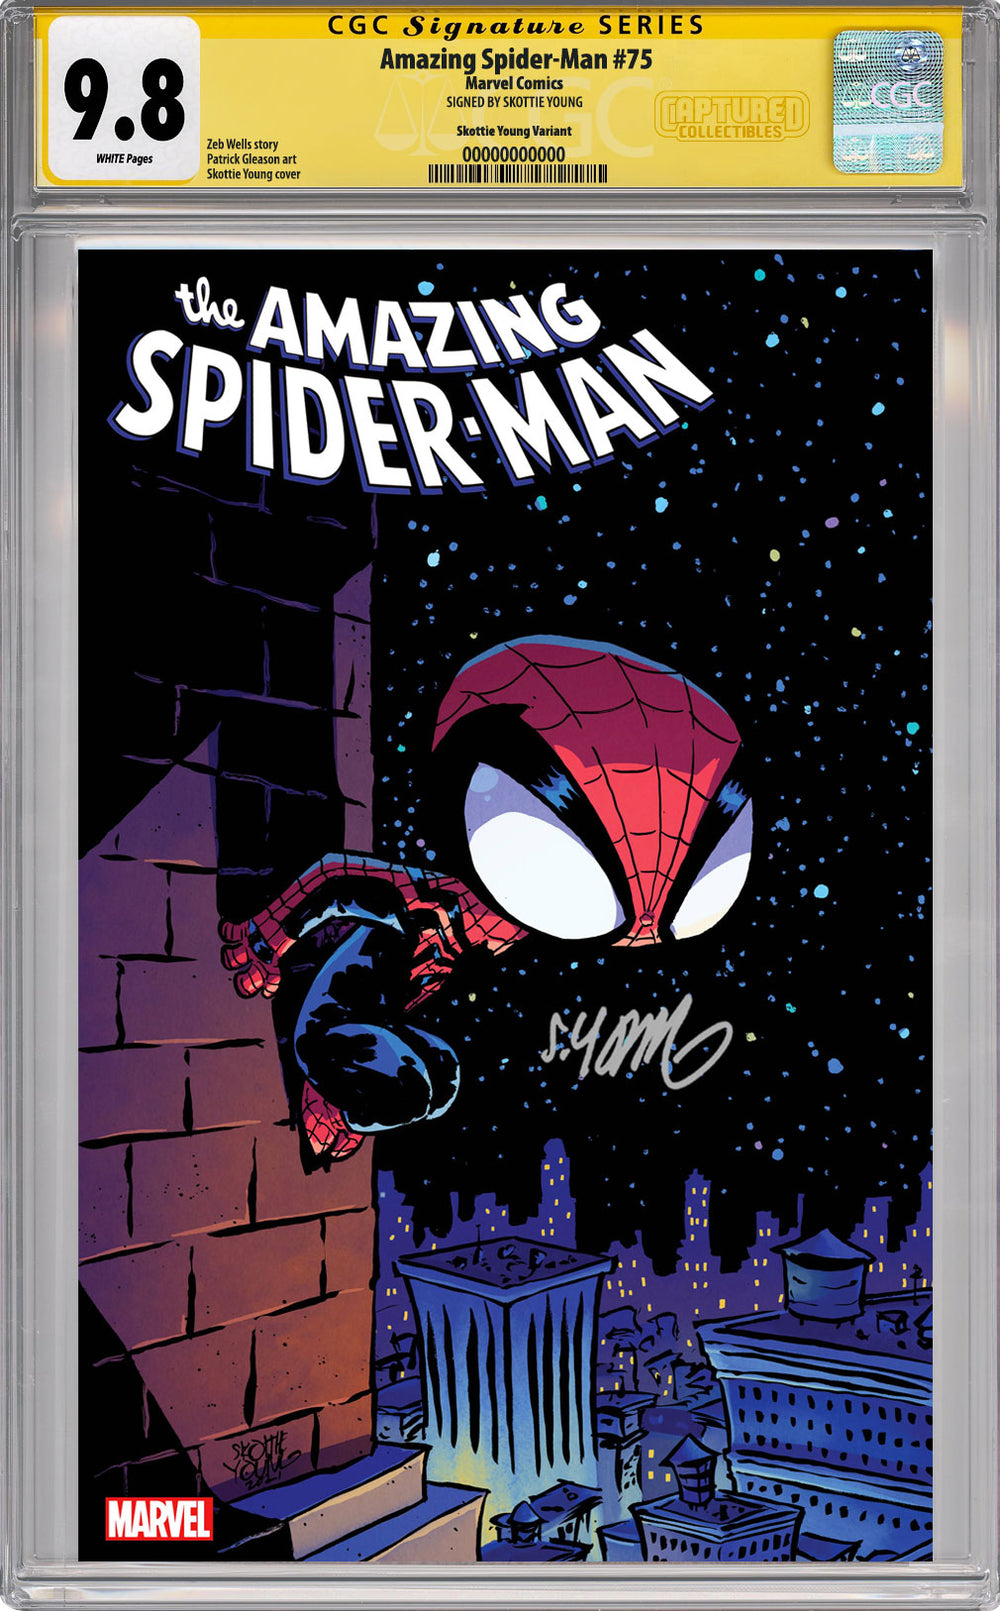 Amazing Spider-Man #75 Variant CGC SS 9.8 Signed by Skottie Young